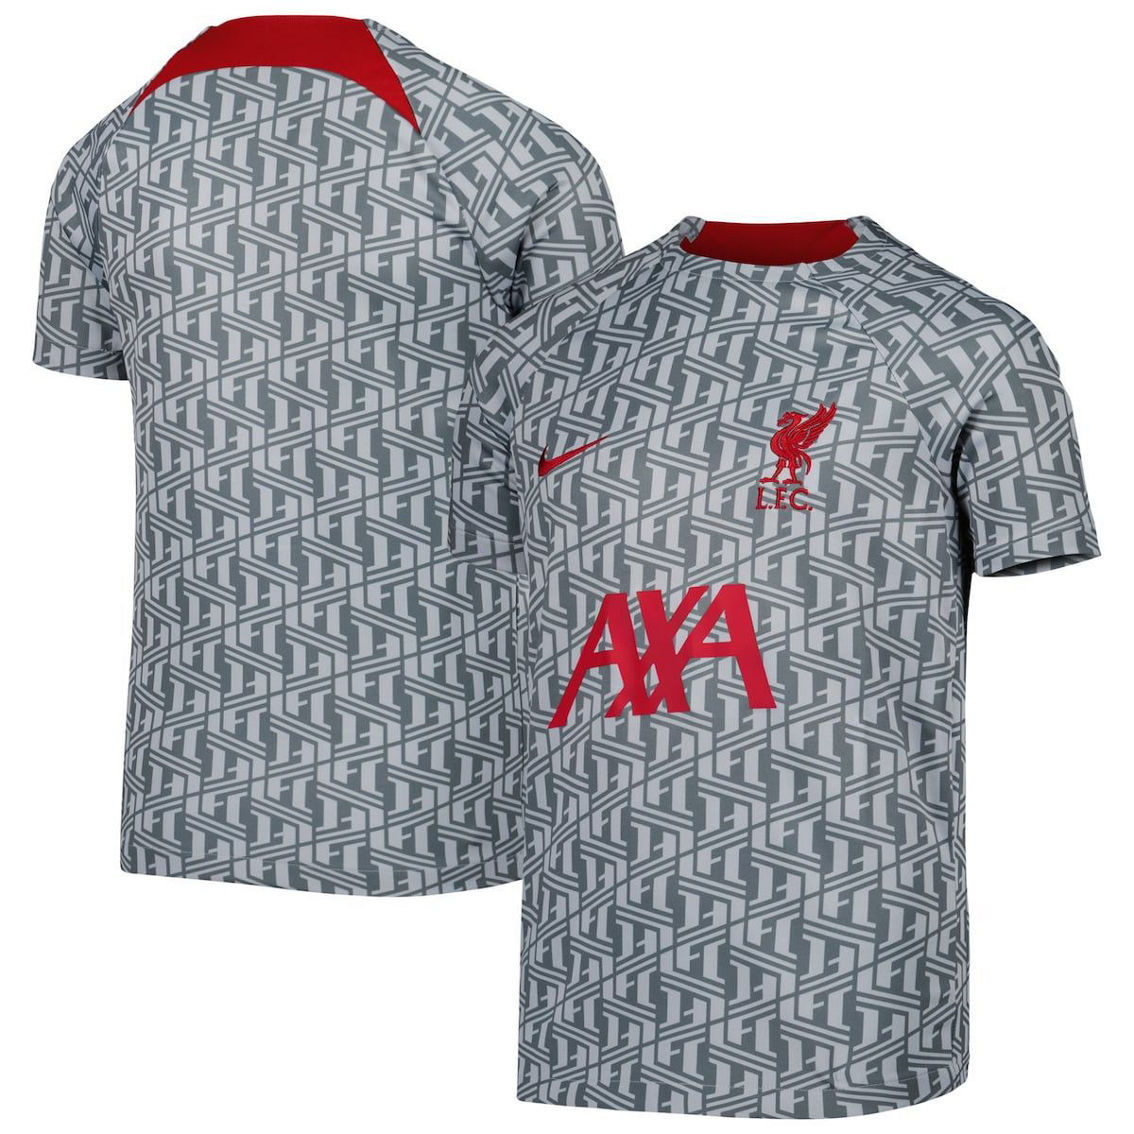 Nike Youth Gray Liverpool Pre-Match Top - Image 2 of 4